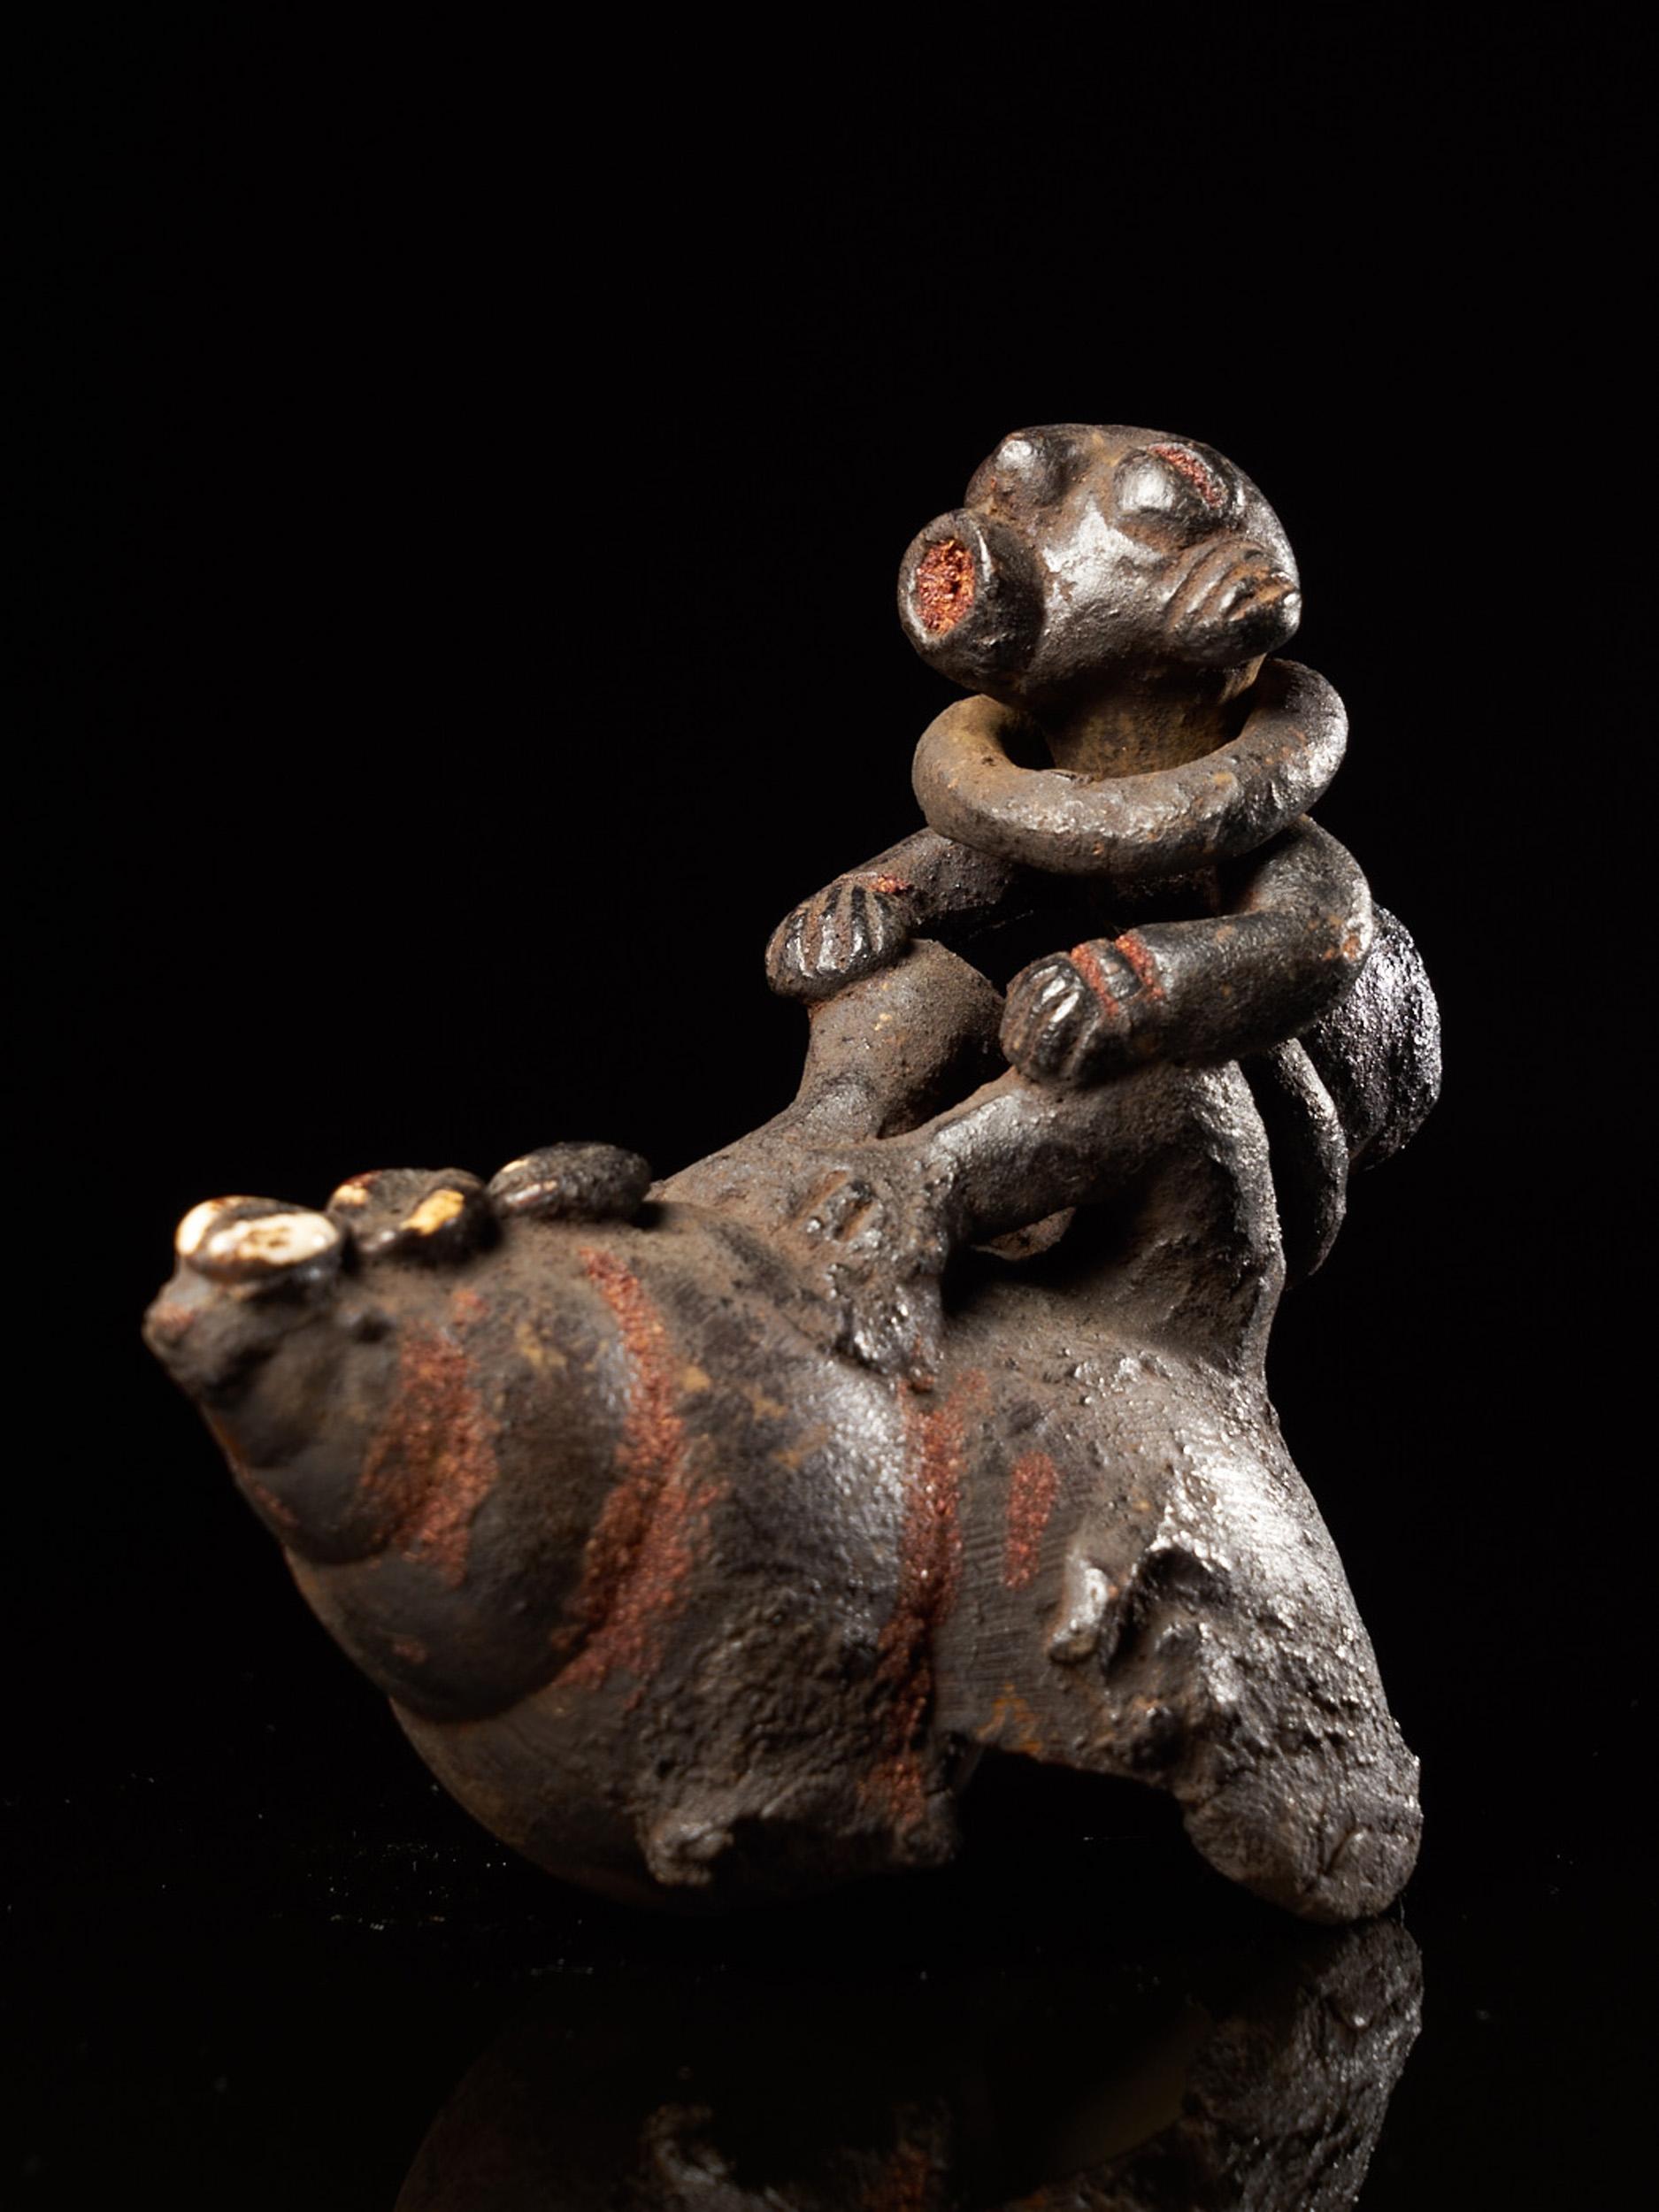 Cameroonian Ceremonial Monkey Figure on a Snailshell, Old German Collection, Bulu People